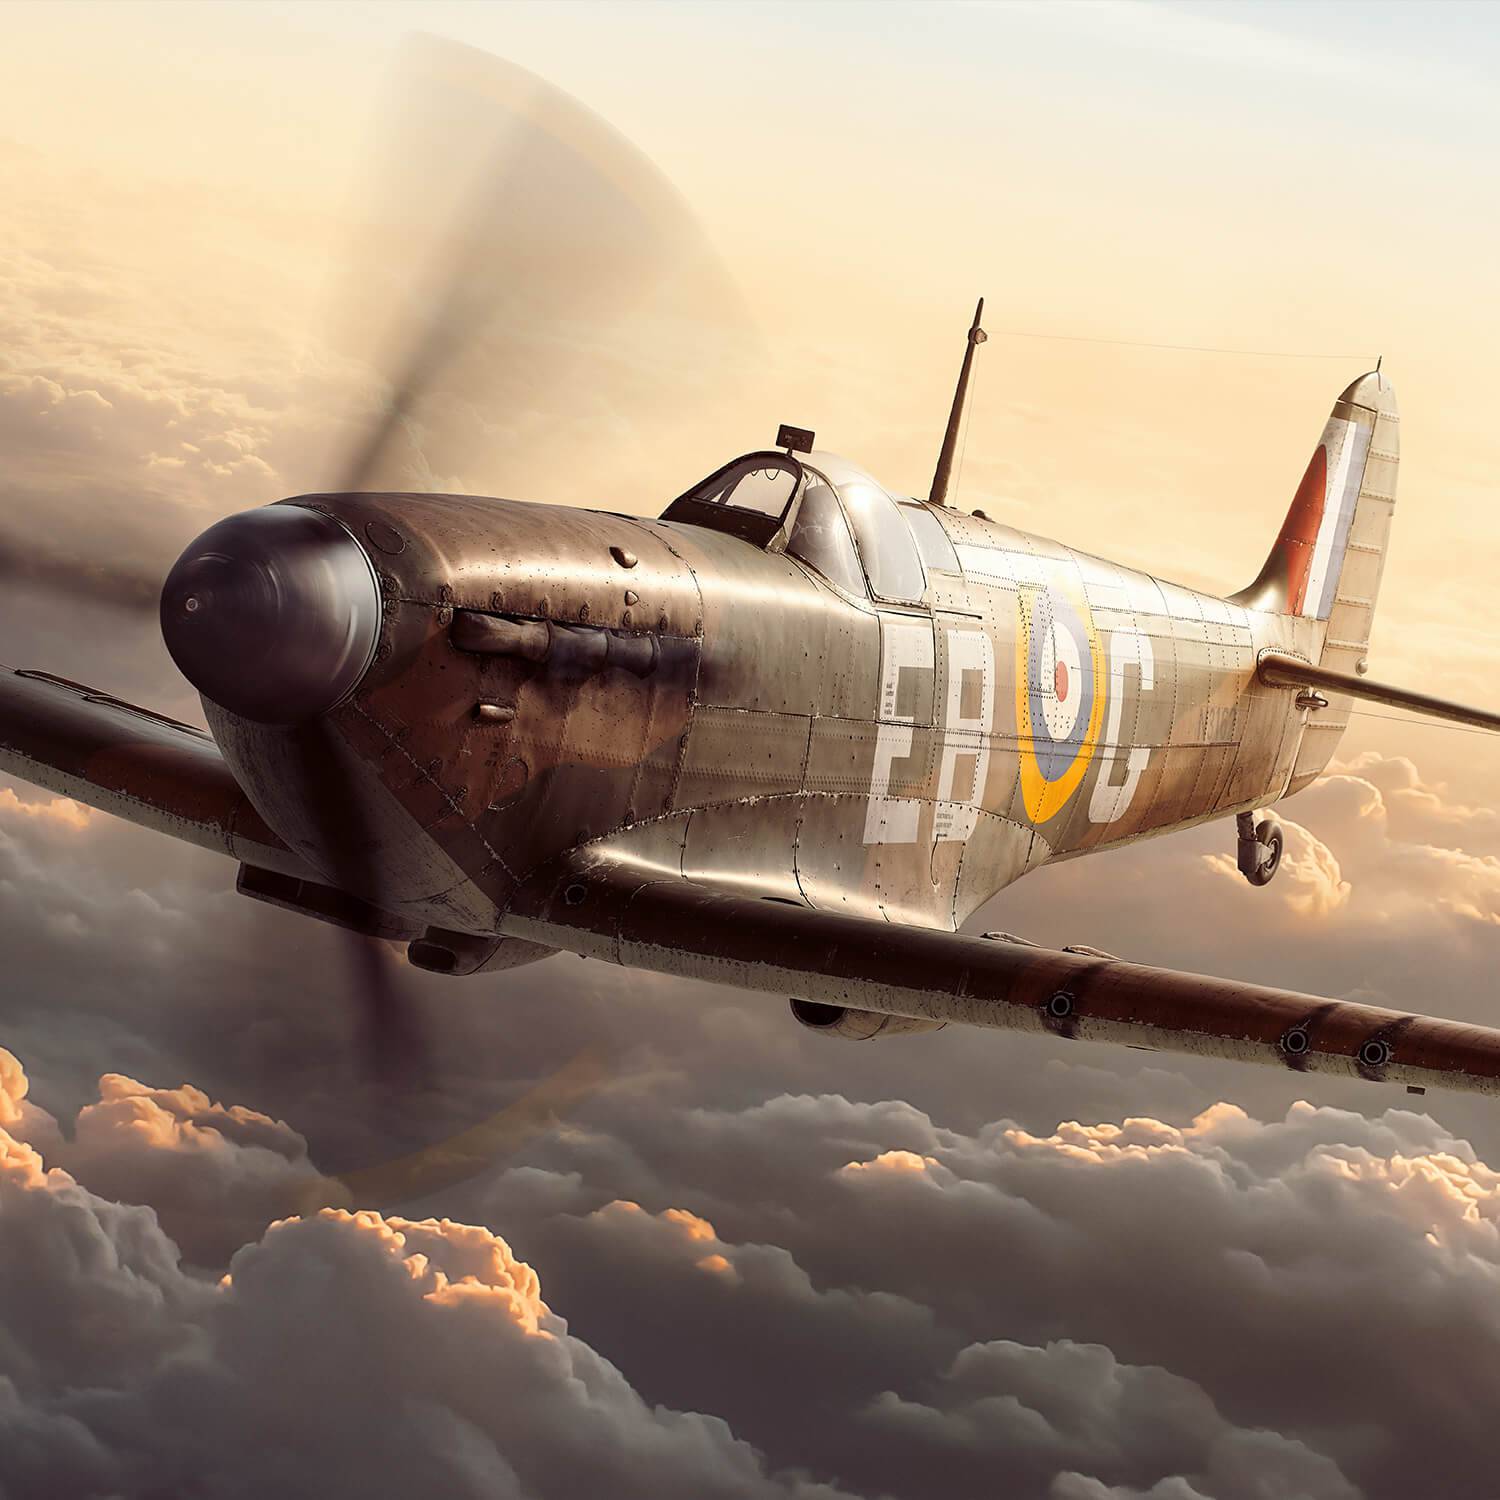 Lost A Leader, Gained An Ace - Spitfire - Eric Stanley Lock - Battle of Britain - 1940 - Automobilist